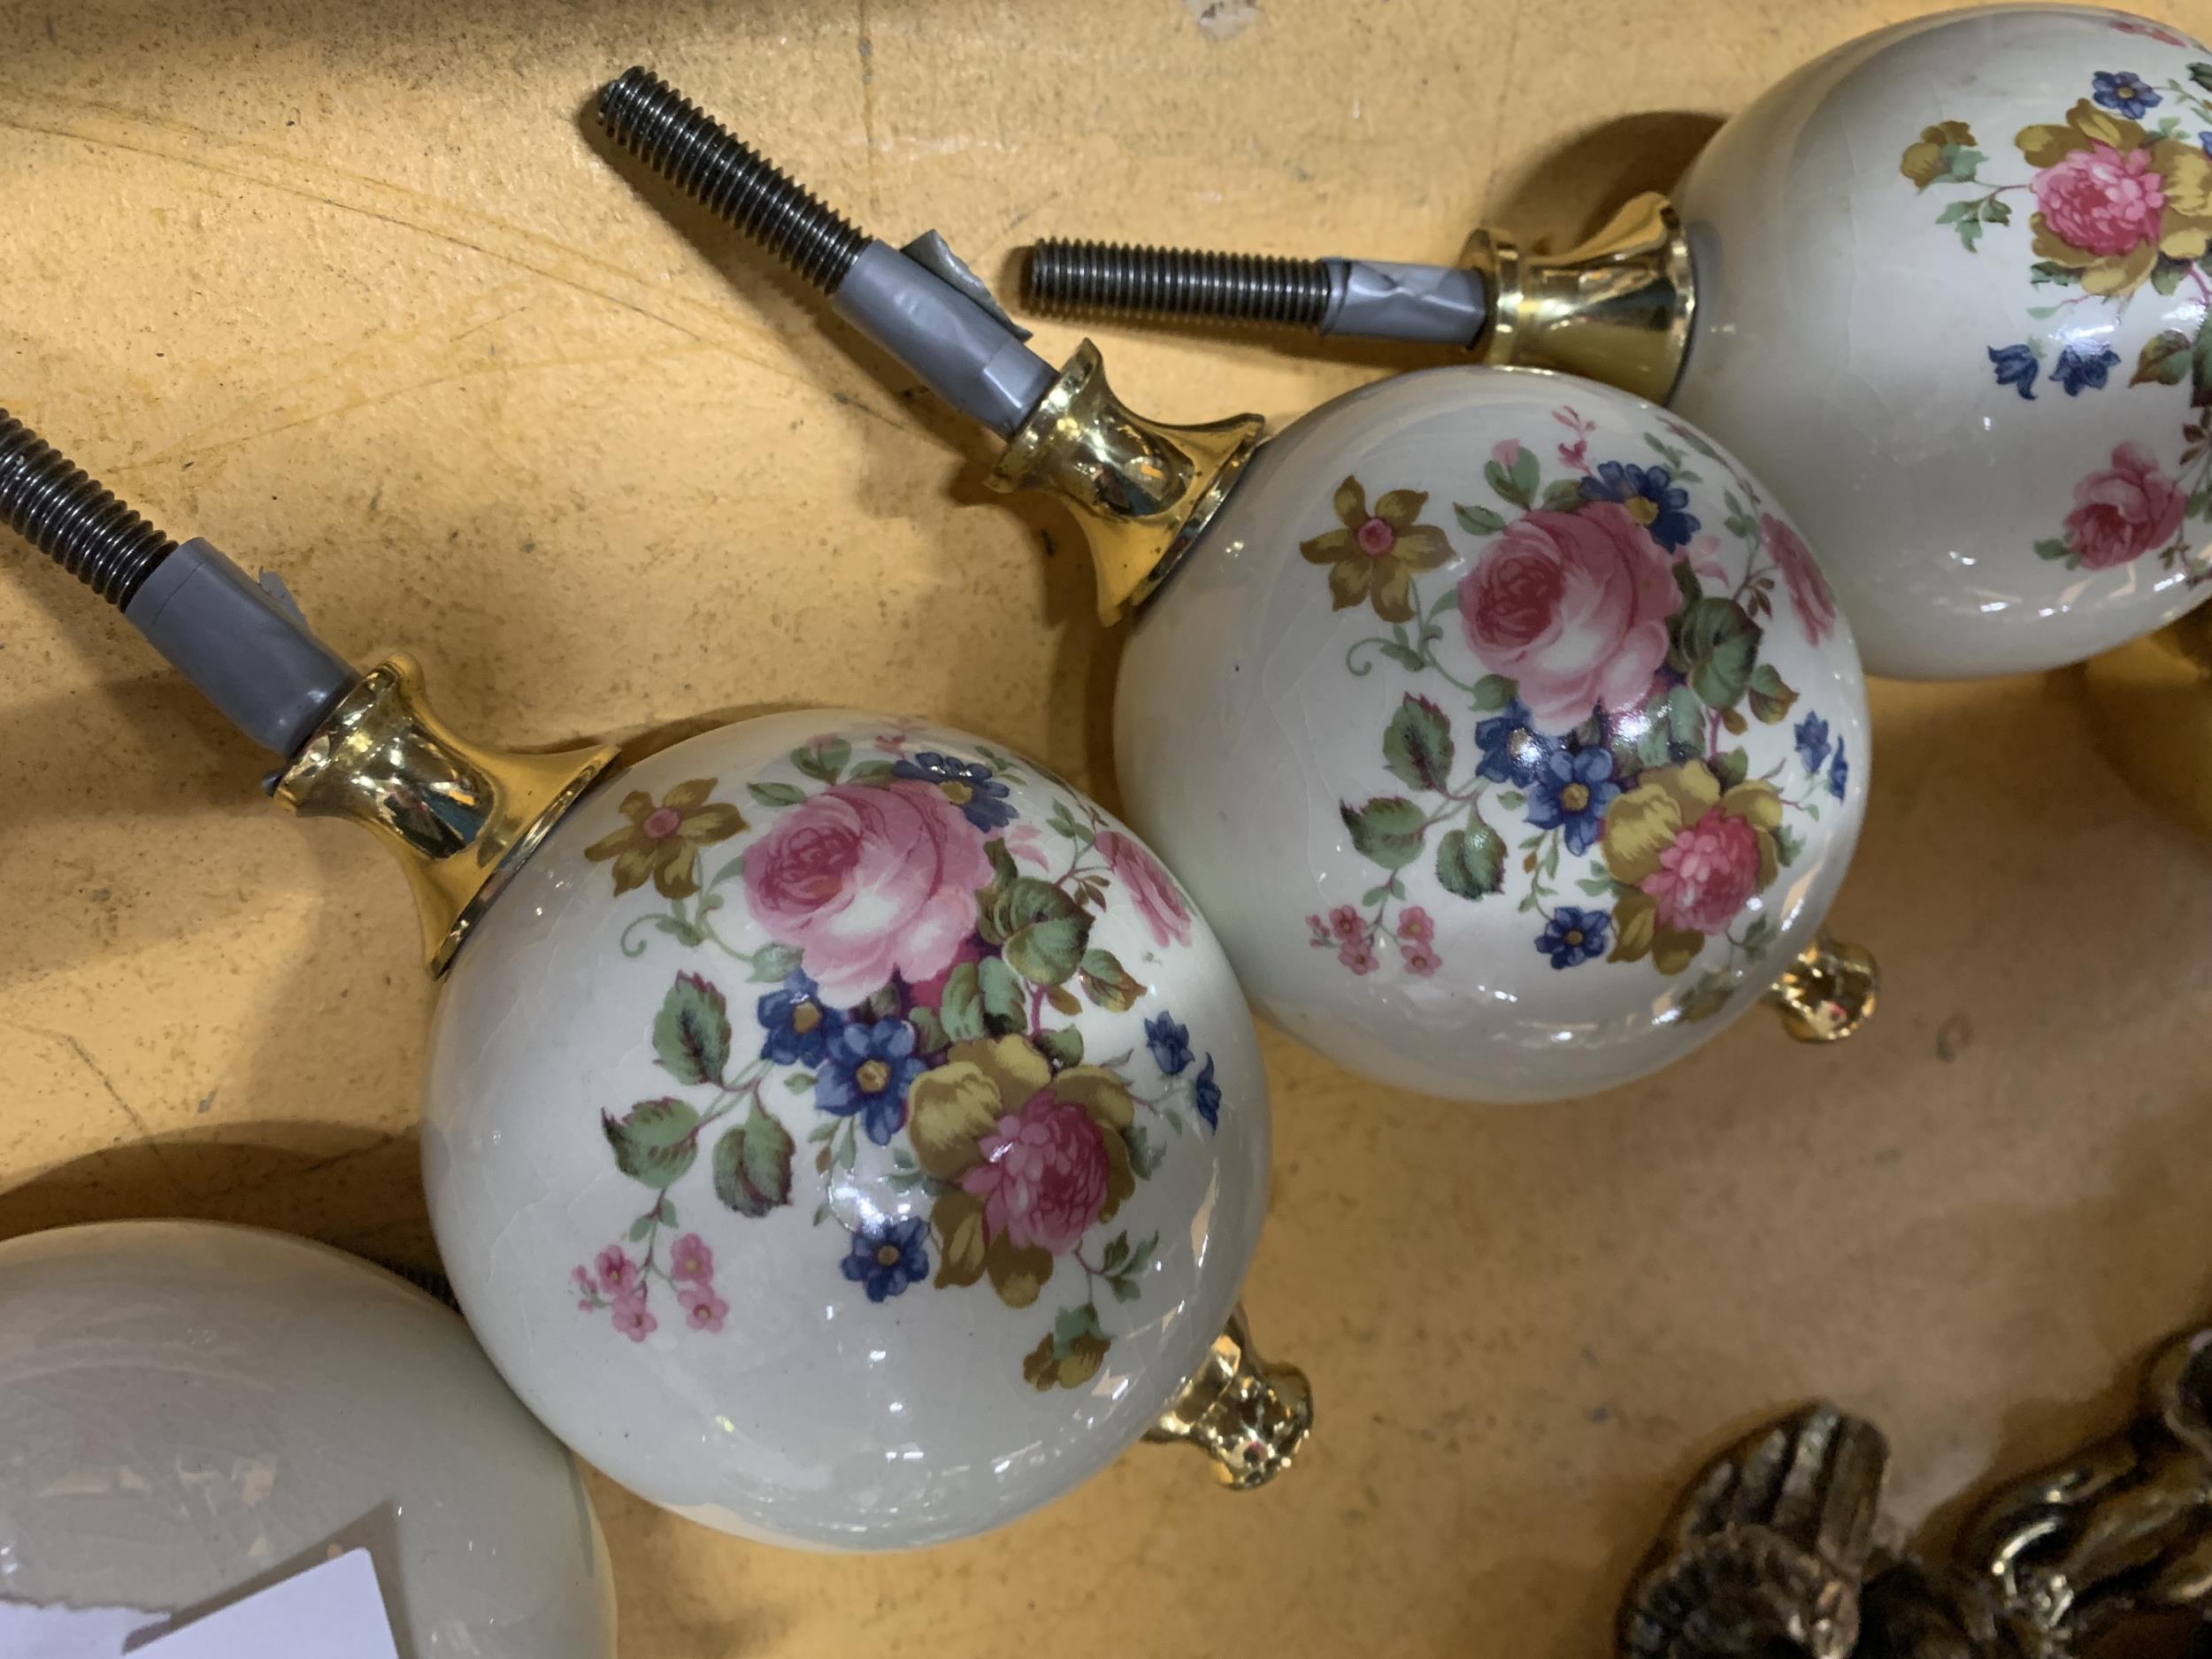 TWO SETS OF BED KNOBS TO INCLUDE BRASS AND FLORAL CERAMIC - Image 2 of 4